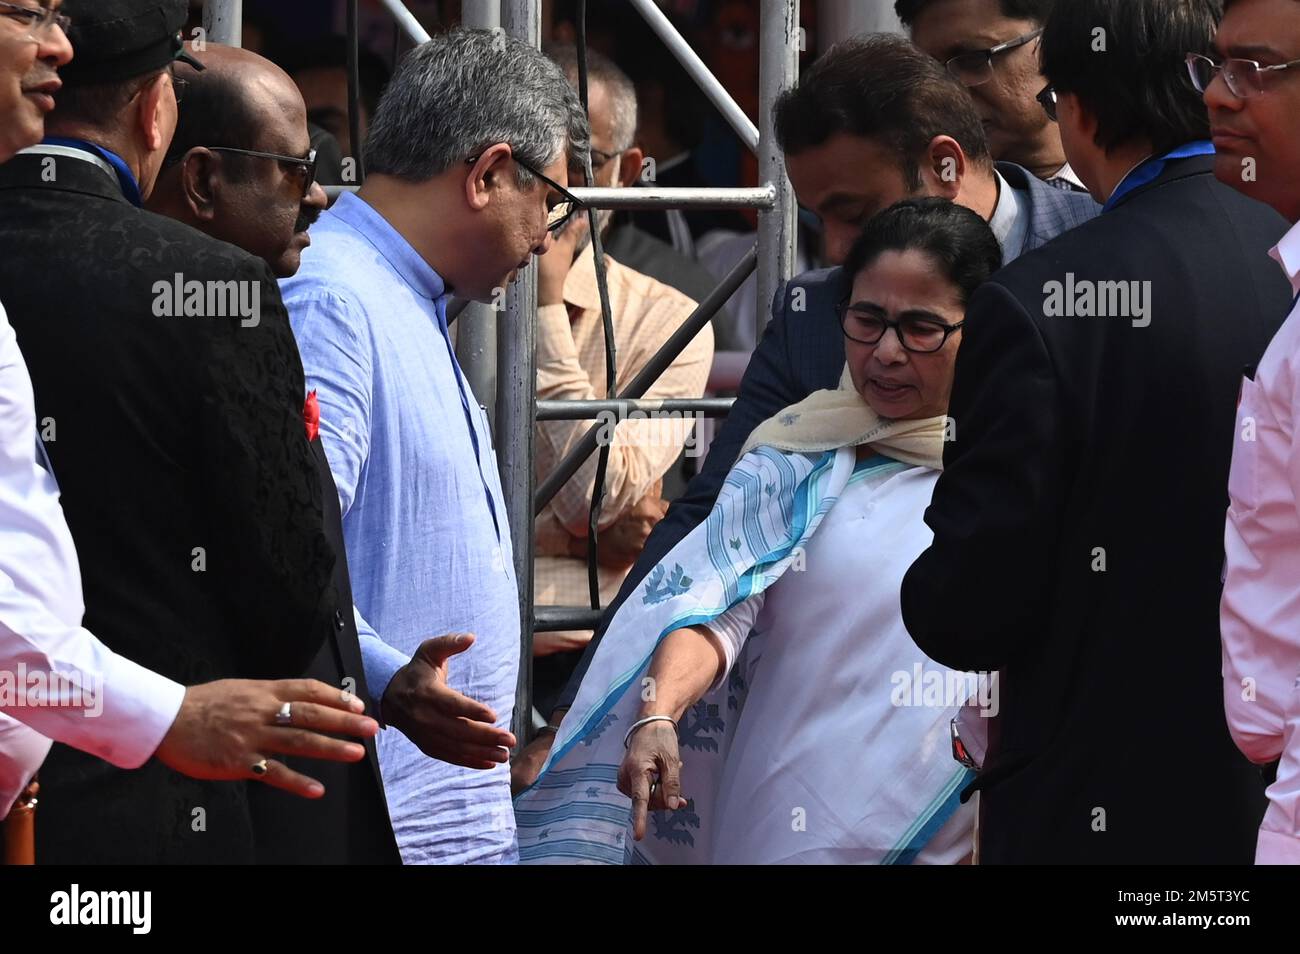 KOLKATA, INDIA - DECEMBER 30: Chief minister Mamata Banerjee refuse to take seat on dias due to Jai Sree Ram slogans and Railways minister Ashwini Vaishnaw interacts and request Mamata Banerjee during flags off of Vande Bharat Express Train from Howrah to NJP at Howrah station on December 30, 2022 in Kolkata, India. Soon after performing the last rites of his mother Heeraben in Ahmedabad, Prime Minister Narendra Modi attended pre-planned developmental works including flagging off Vande Bharat Express connecting Howrah to New Jalpaiguri, in West Bengal, via video conferencing. This is West Beng Stock Photo